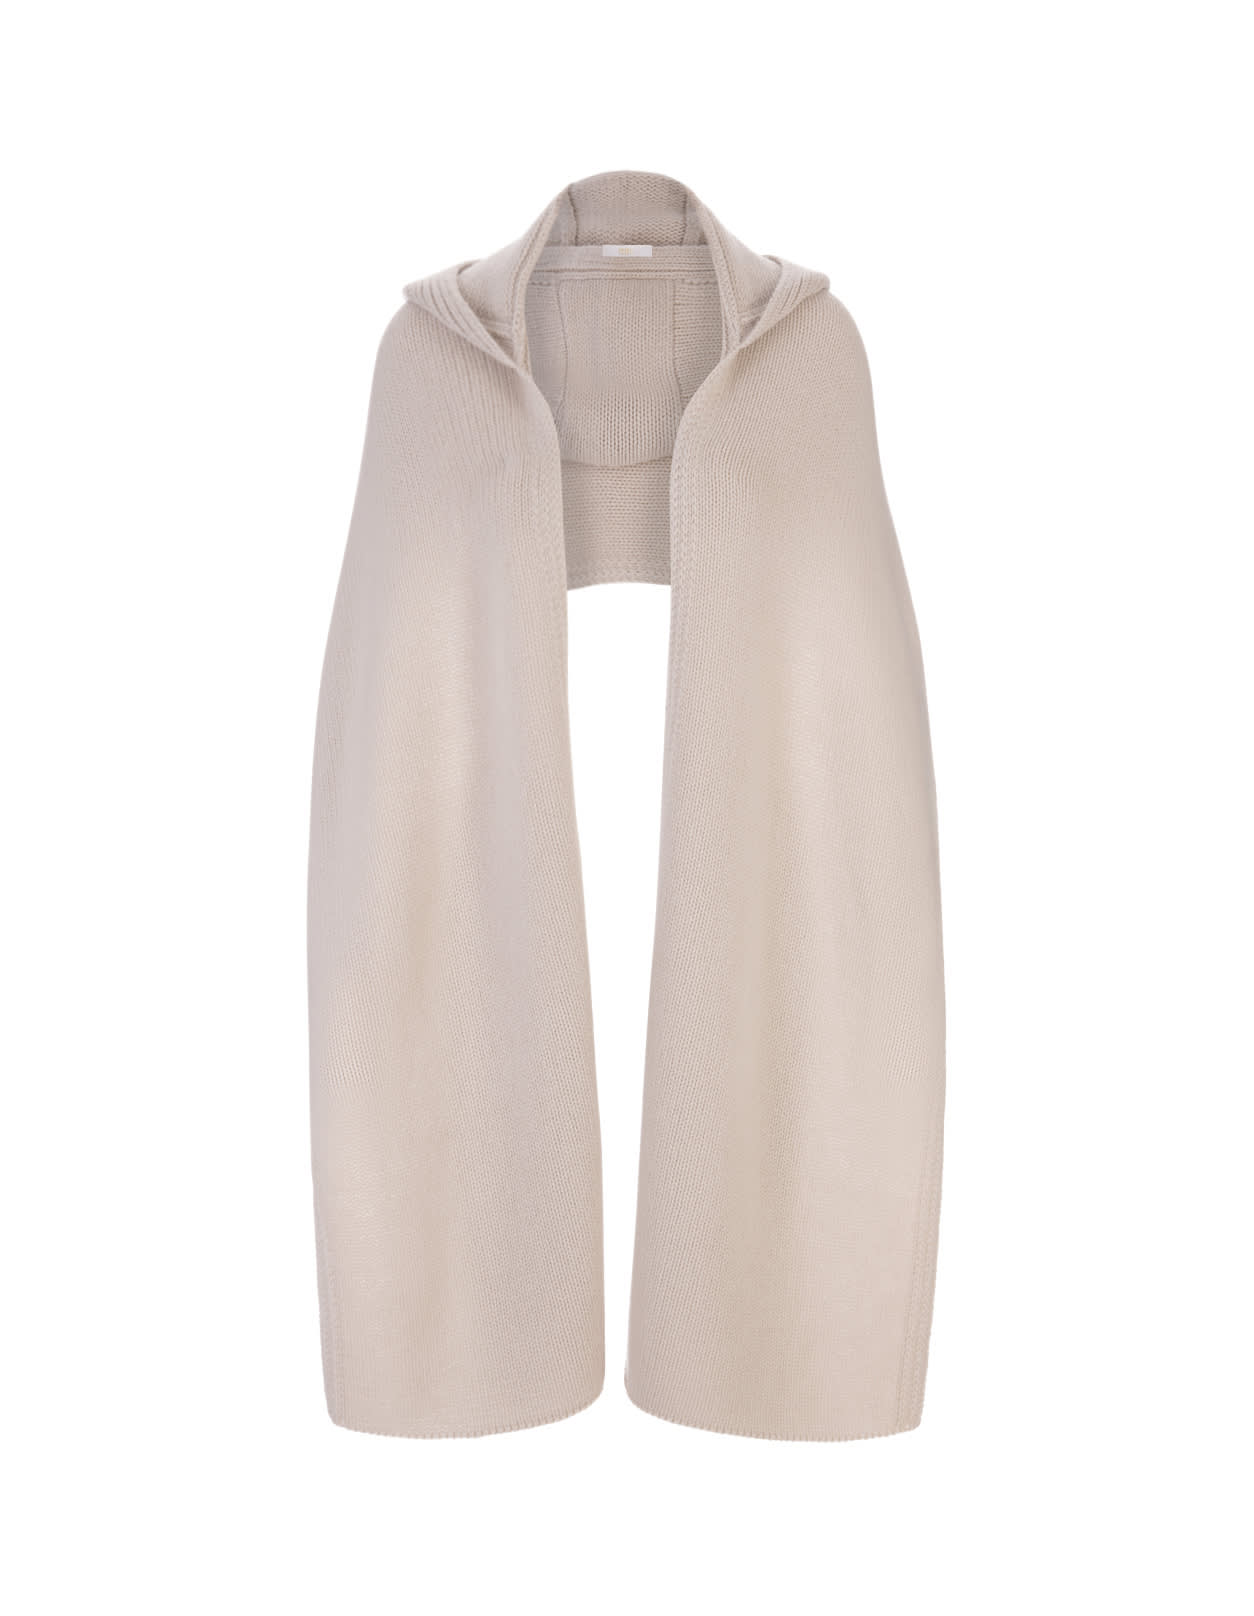 Fedeli Butter Cashmere Hooded Shawl